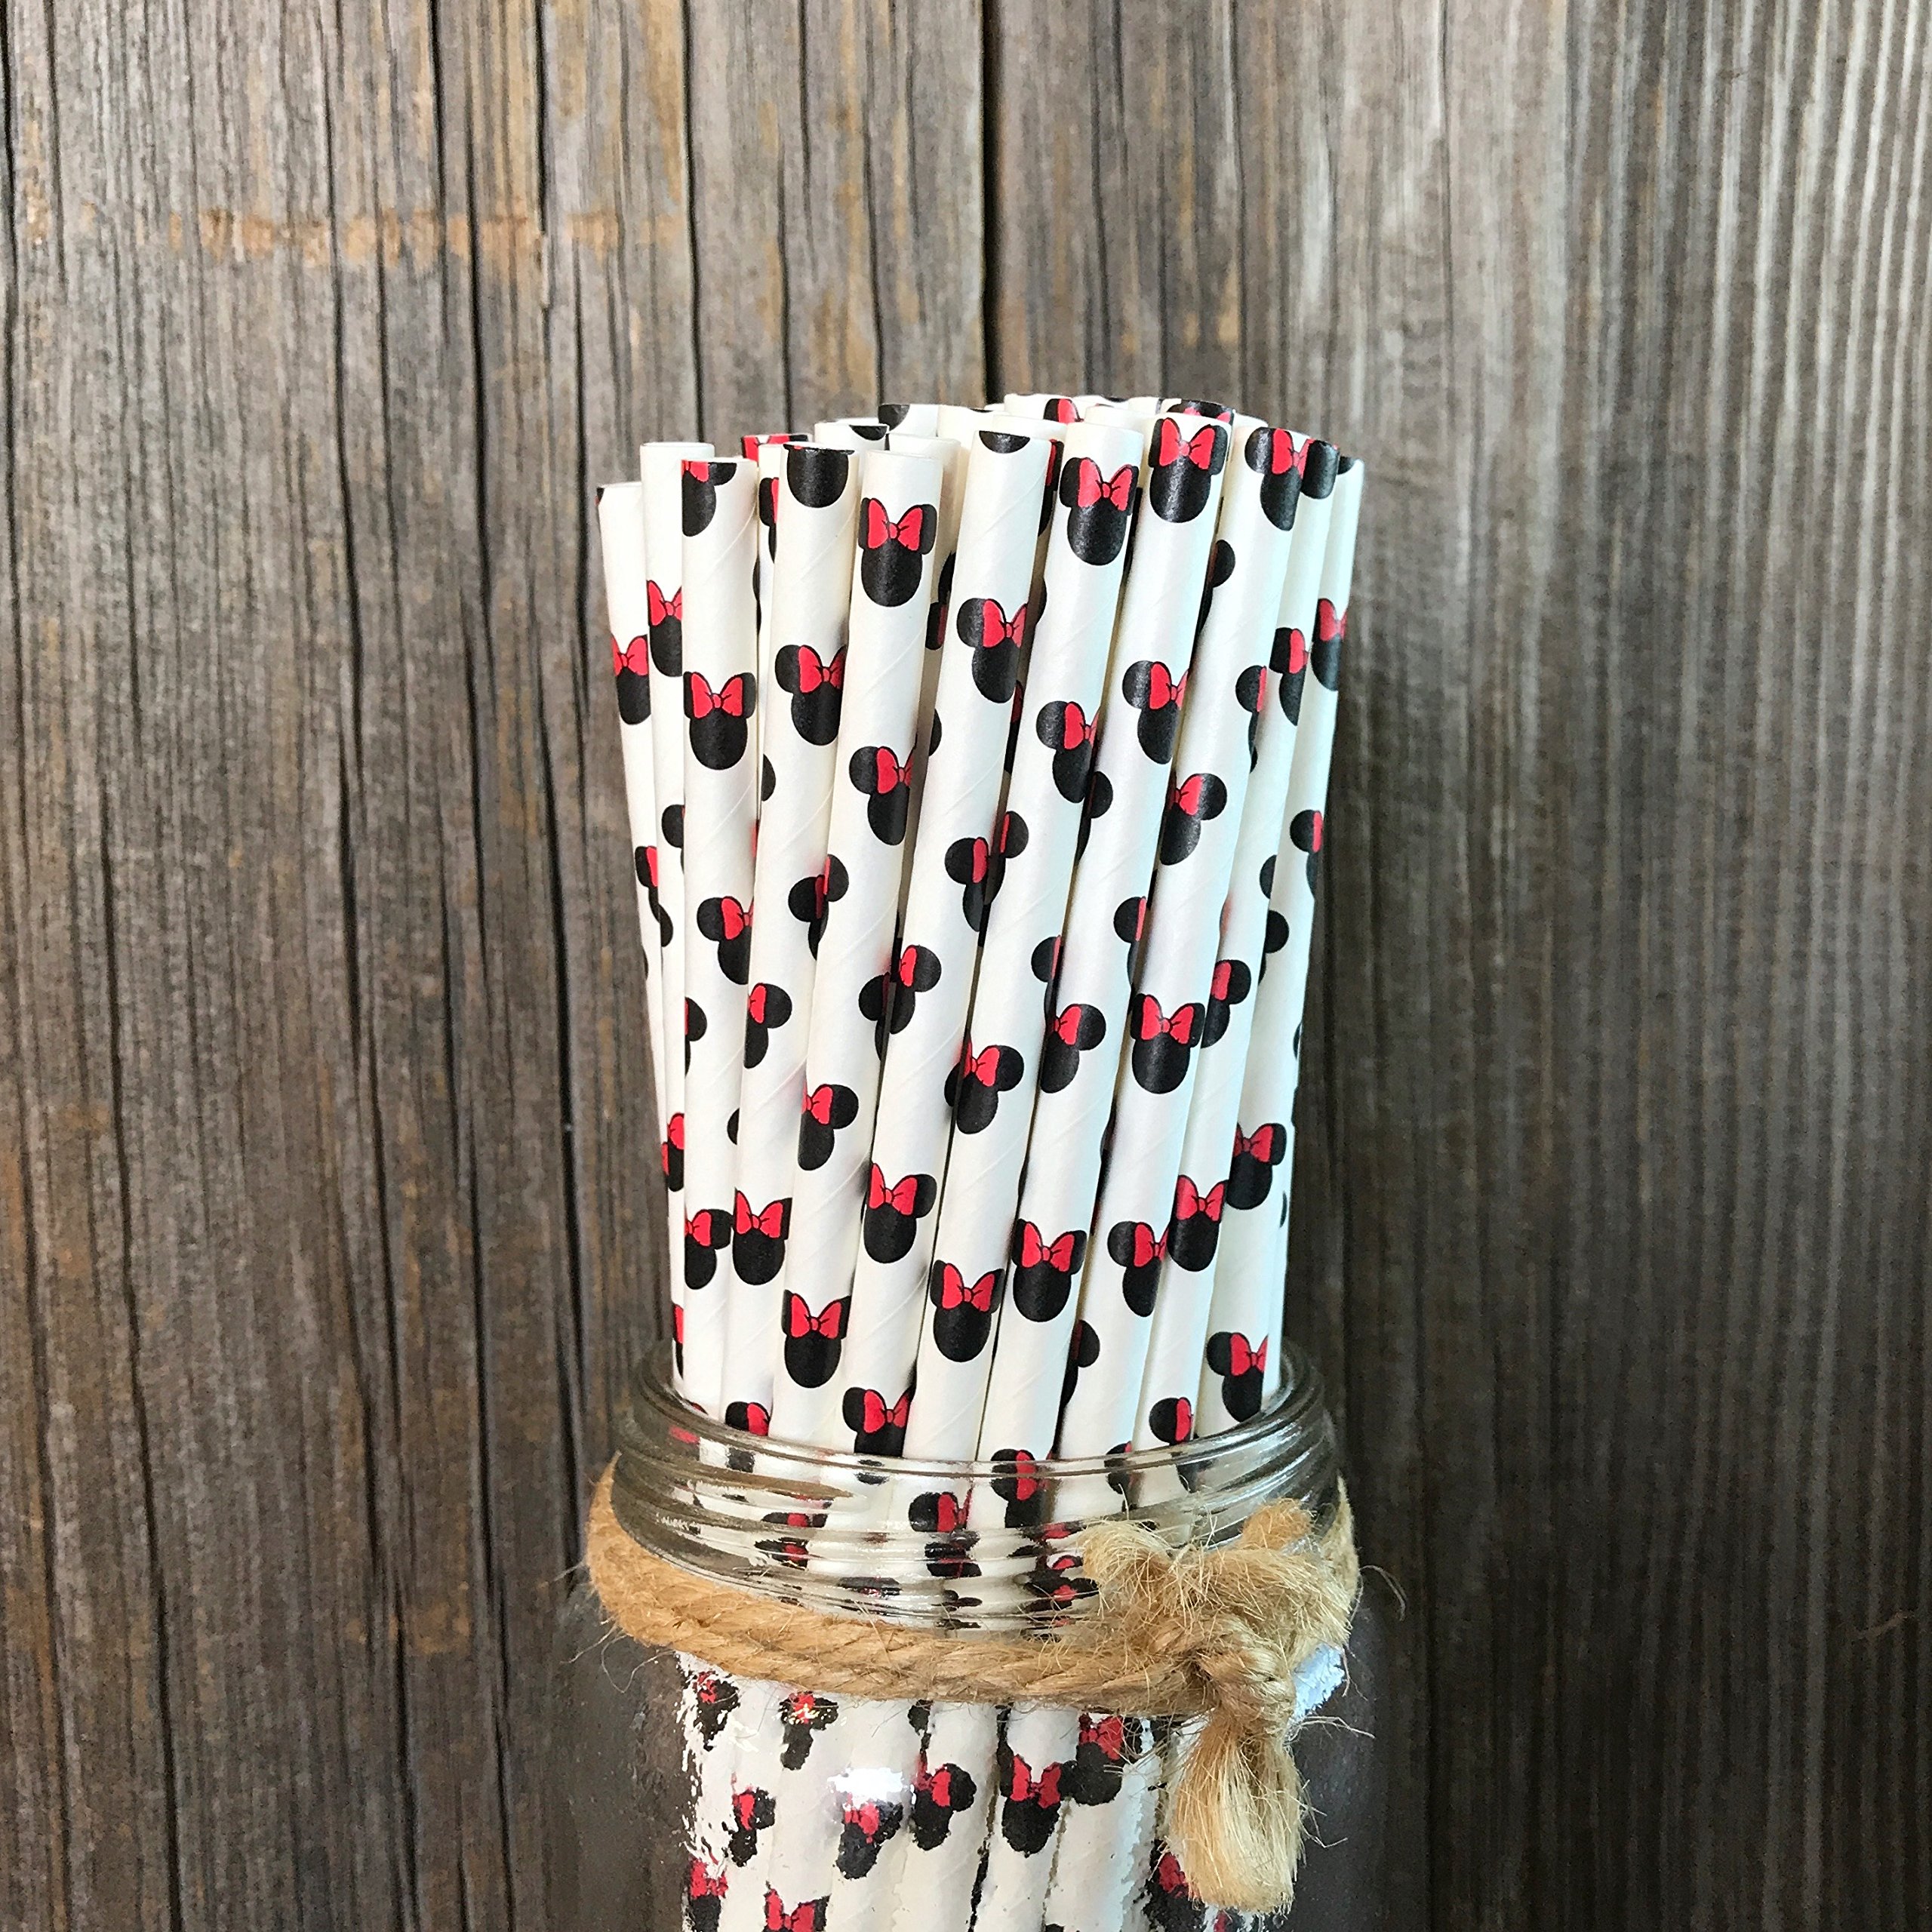 Minnie Mouse Inspired Paper Straws - Red Black White - 7.75 inches - 50 Pack - Outside The Box Papers Brand